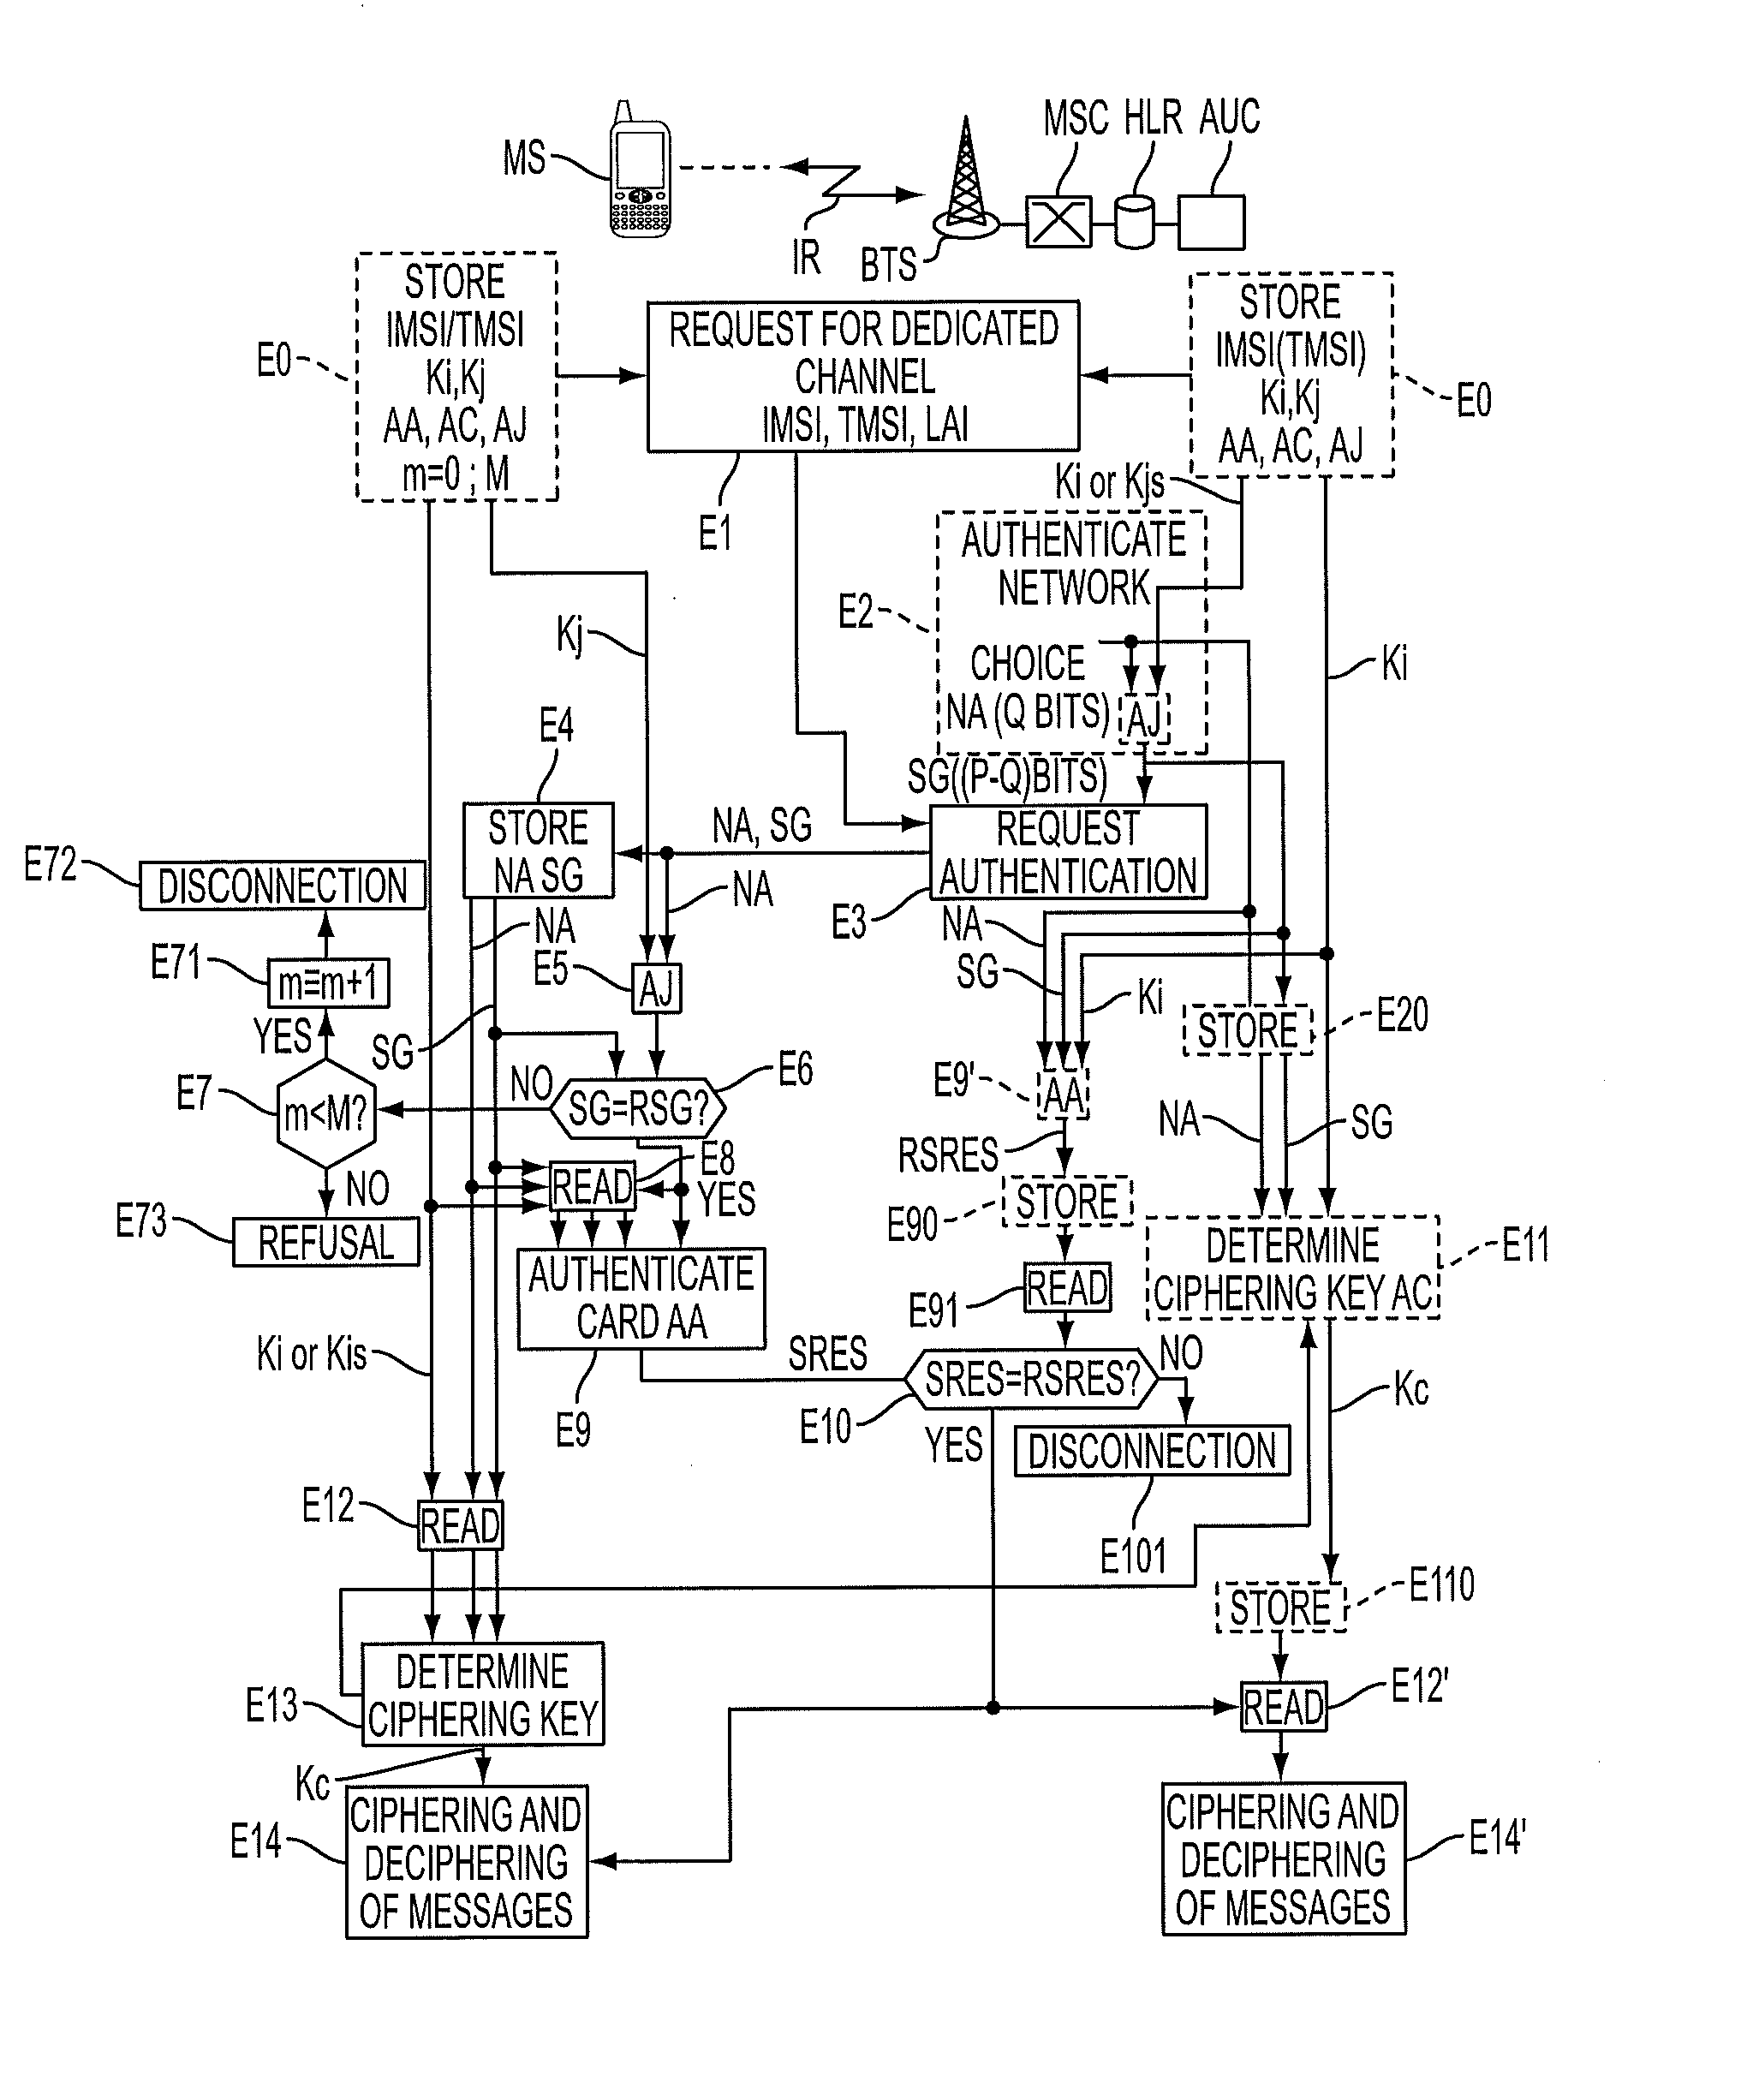 Authentication in a radiotelephony network